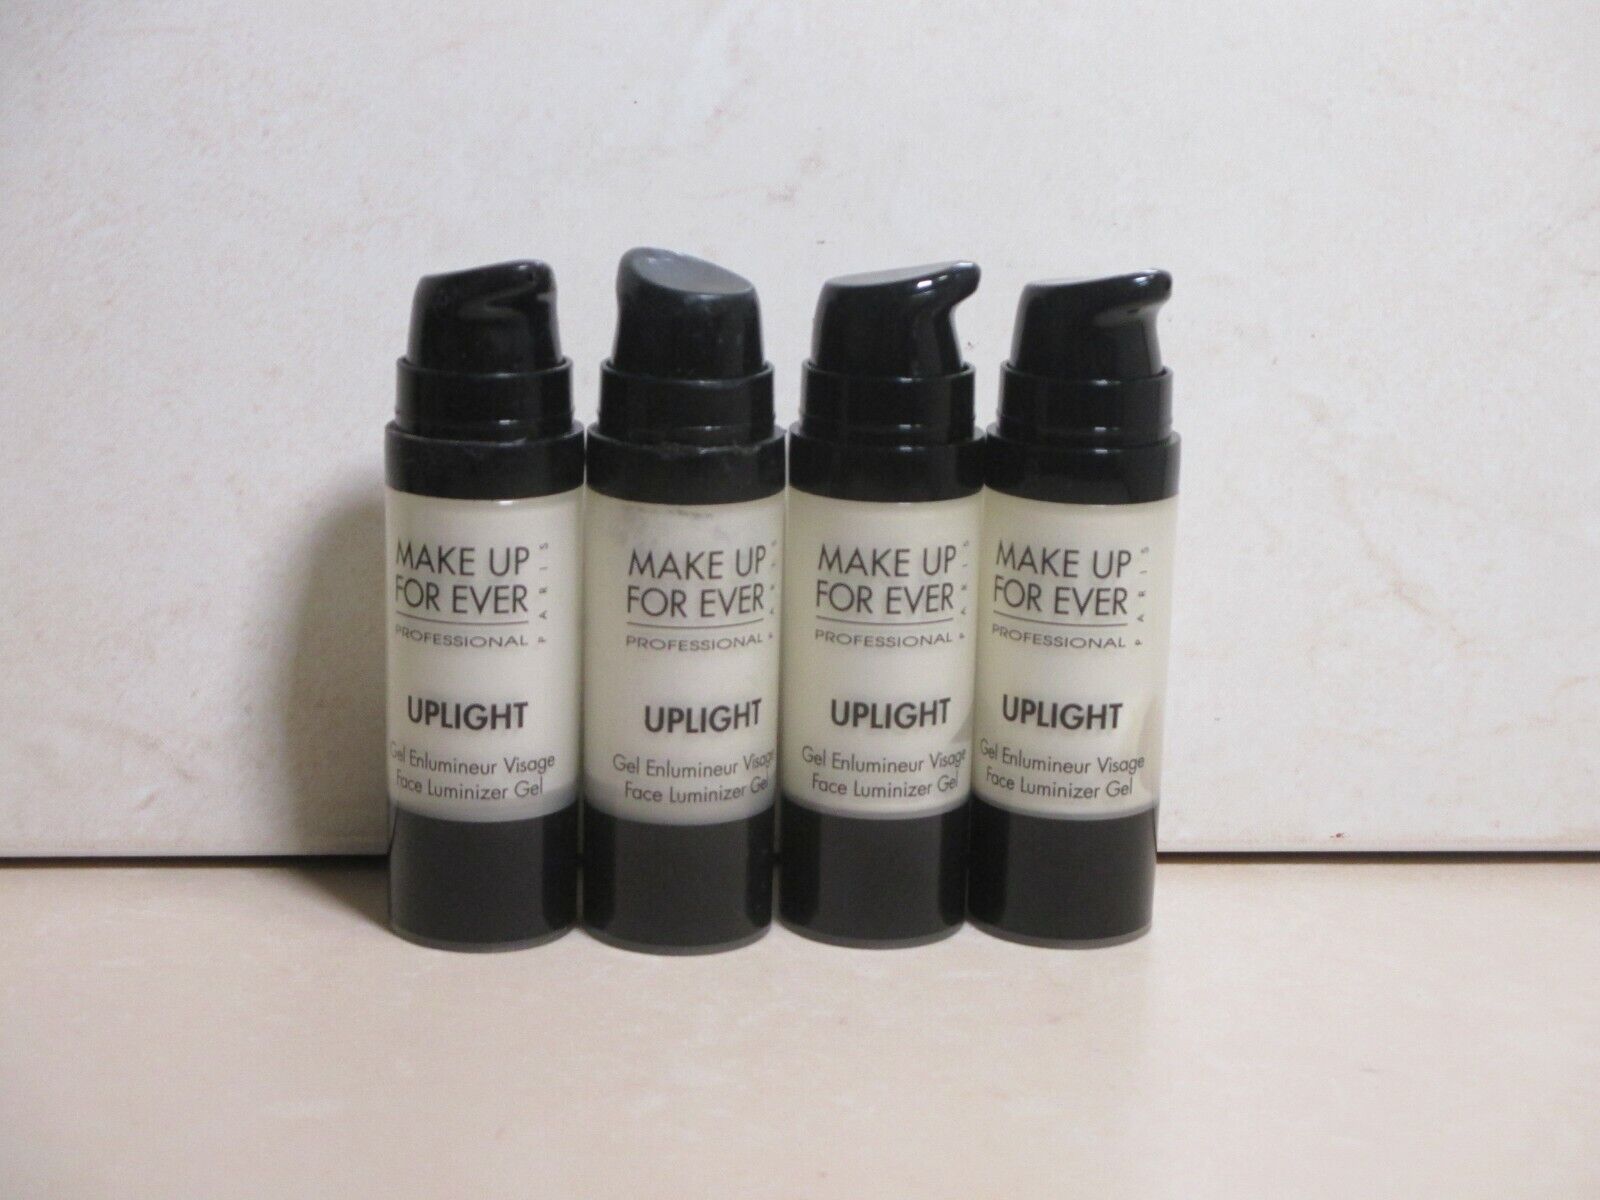 MAKE UP FOR EVER UPLIGHT FACE LUMINIZER GEL 21 0.55 OZ ~ 4 PIECE LOT ~ NO CAP MAKE UP FOR EVER DOES NOT APPLY